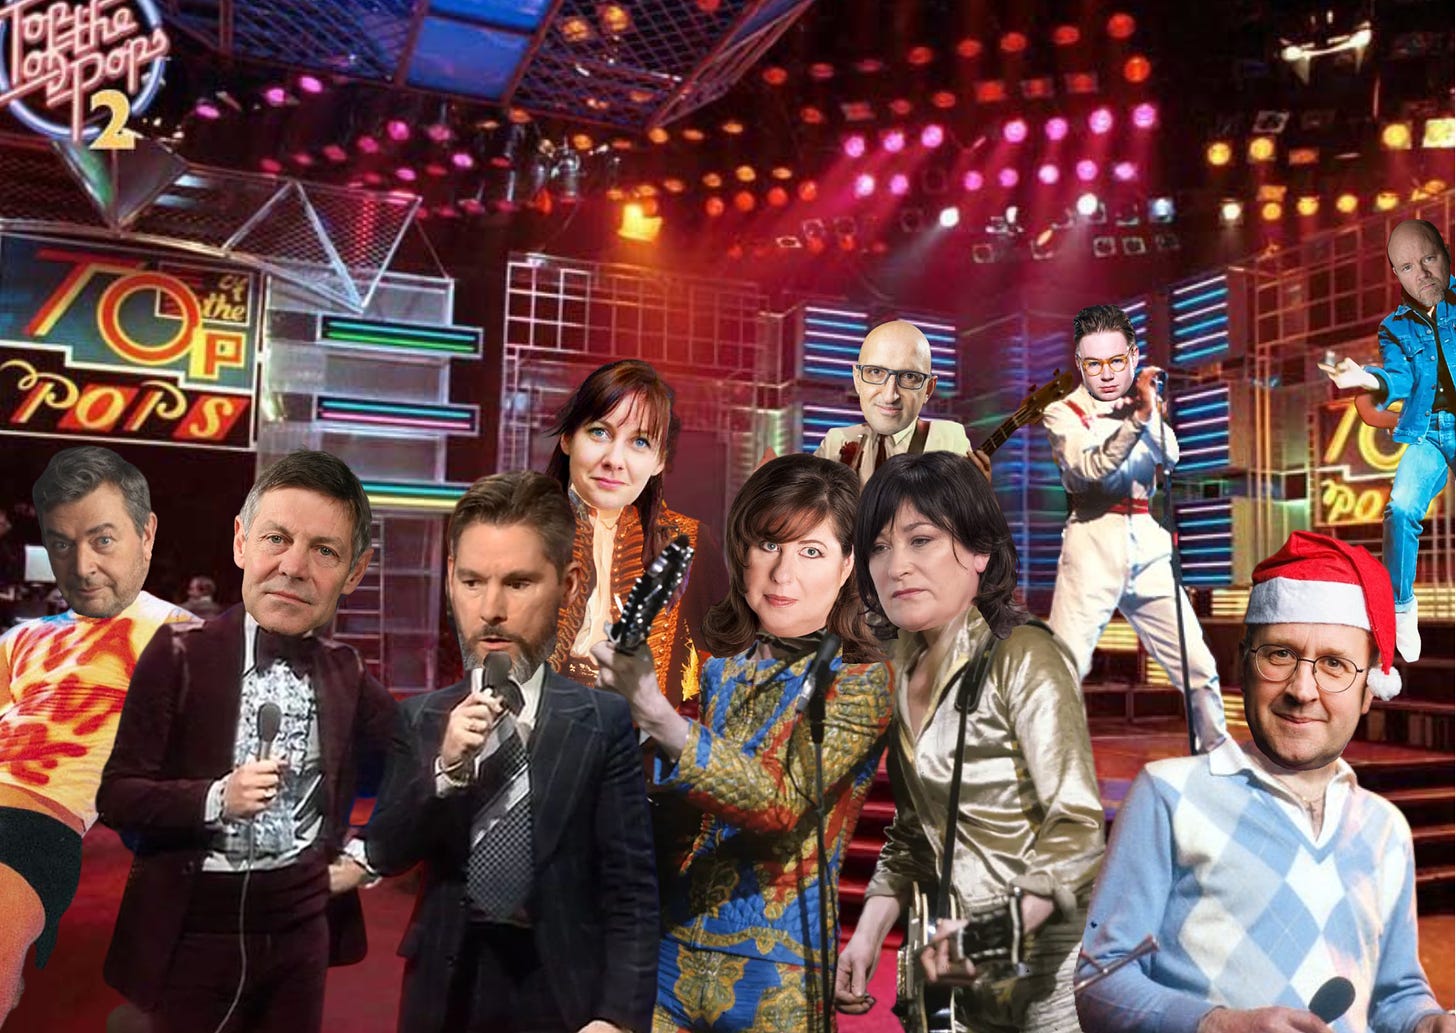 A Top of the Pops studio filled with columnists — including David Aaronovitch, Matthew Parris, Dan Hodges, Susie Boniface, Sarah Vine, Jan Moir, Matthew Syed, James Marriott, Christopher Hope and Toby Young.